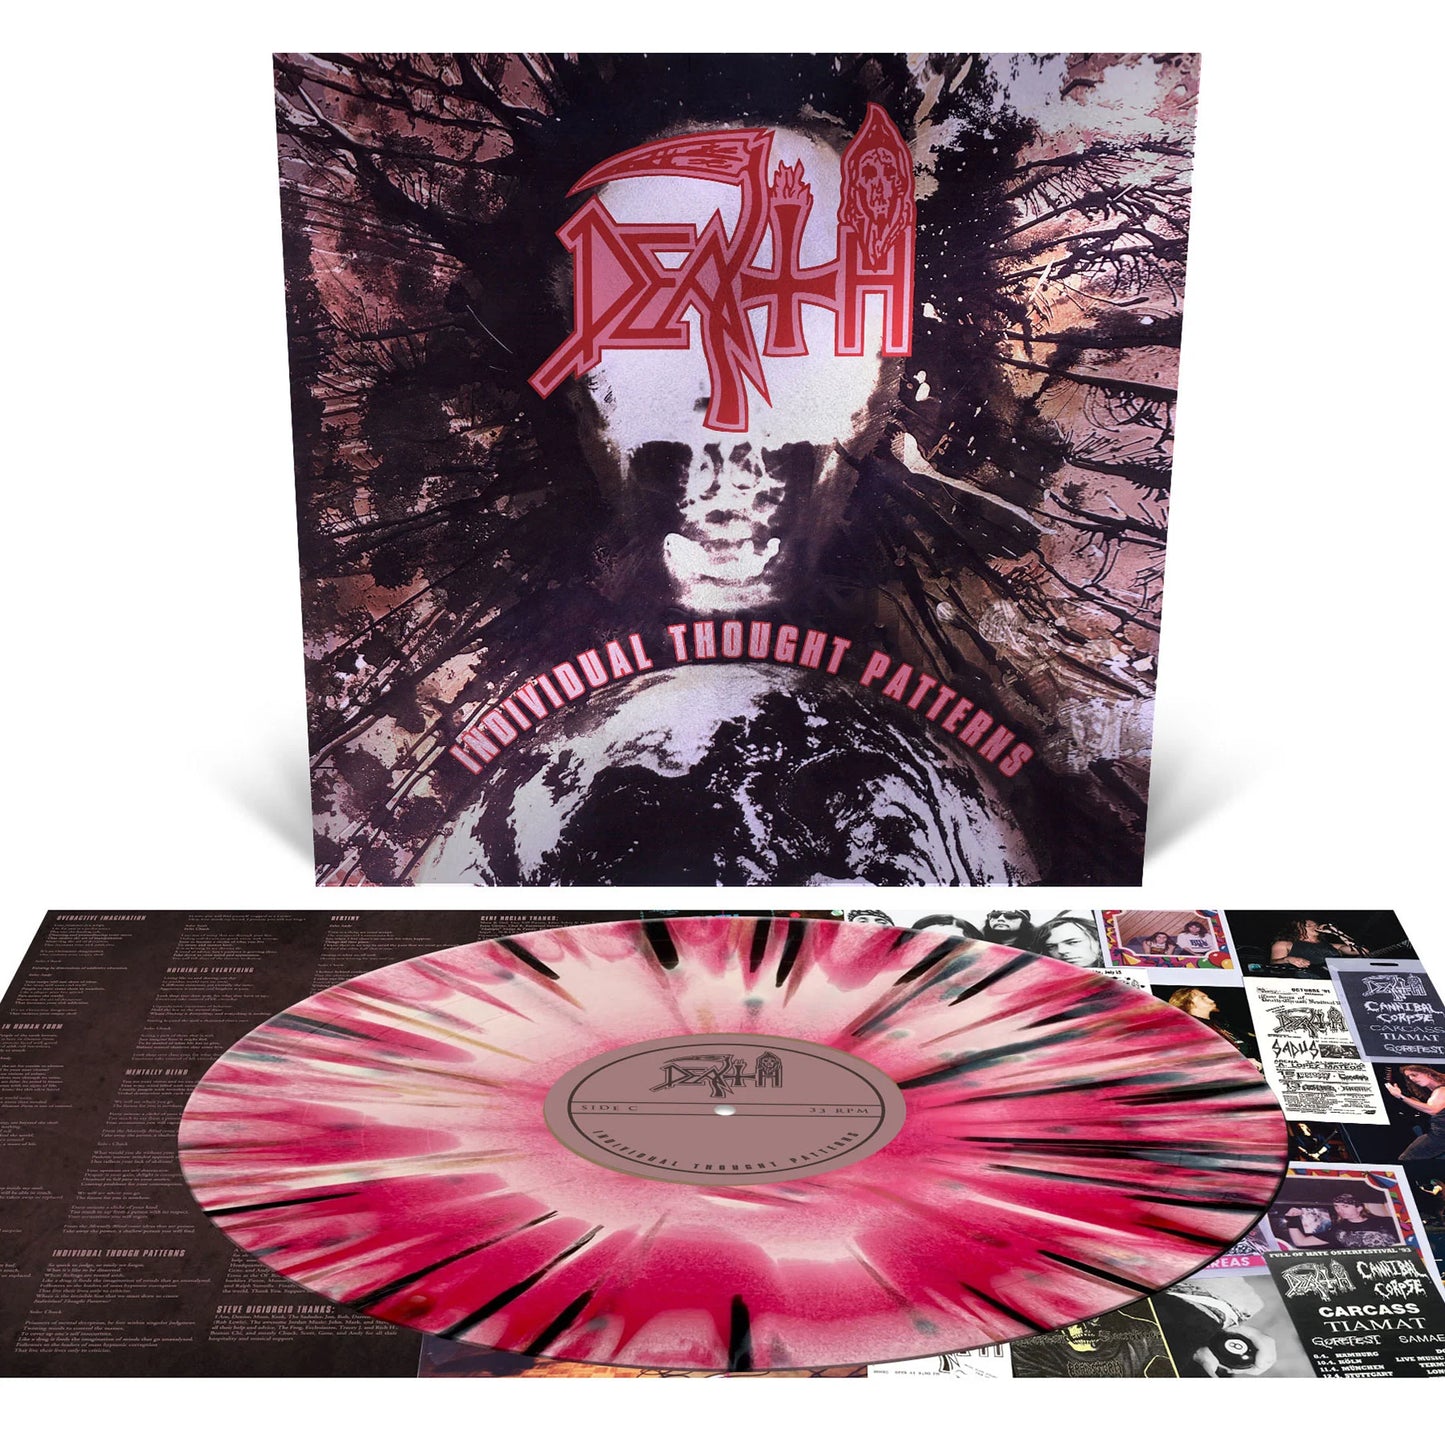 DEATH - Individual Thought Patterns LP (DELUXE) (PREORDER)